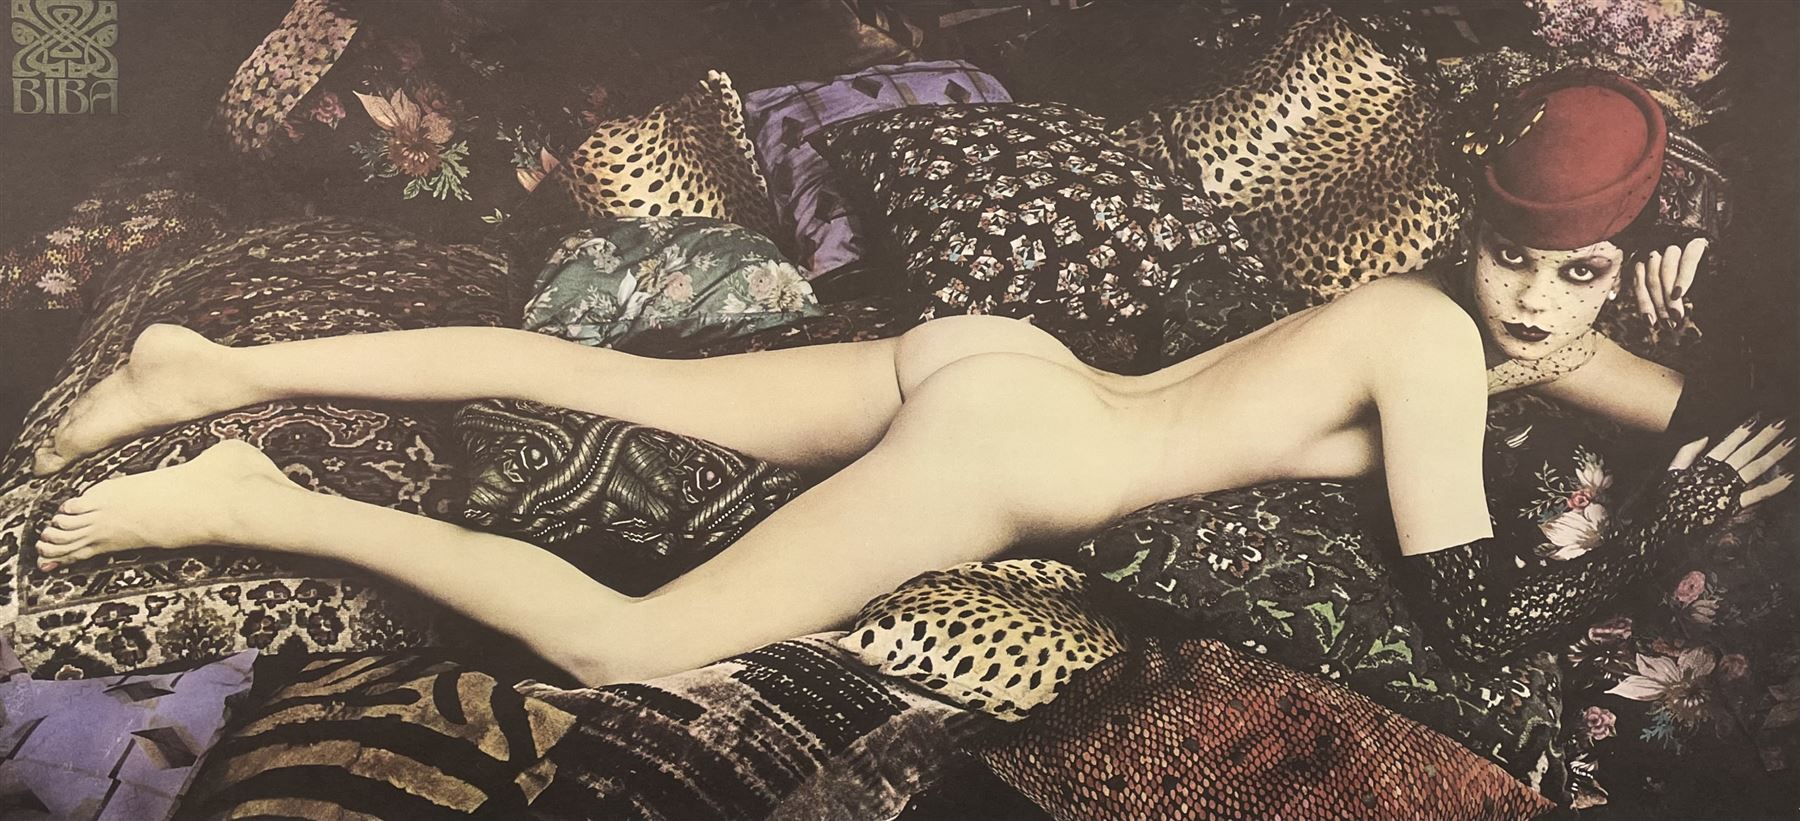 A 1974 Biba poster photographed by James Wedge for Biba Stores